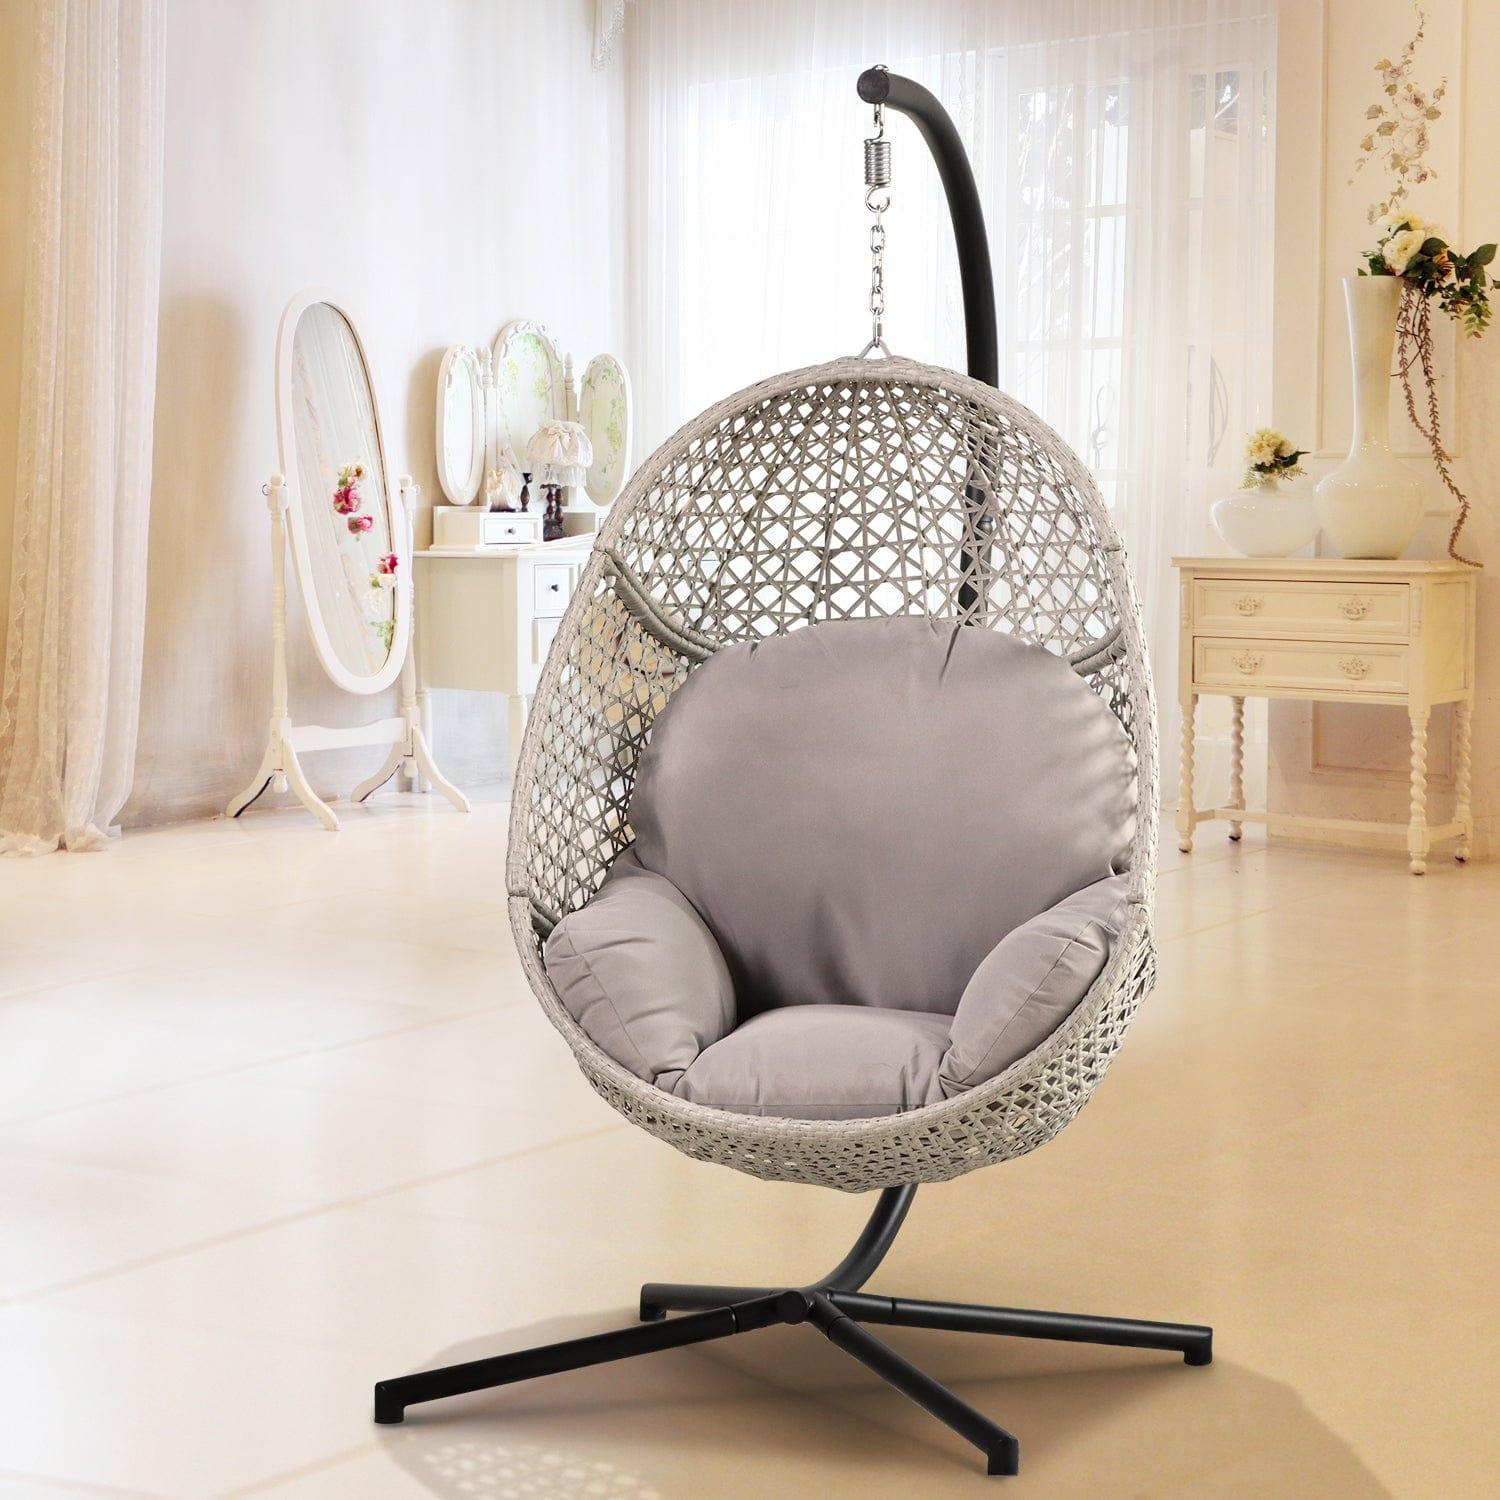 Shop Large Hanging Egg Chair with Stand & UV Resistant Cushion Hammock Chairs with C-Stand for Outdoor Mademoiselle Home Decor